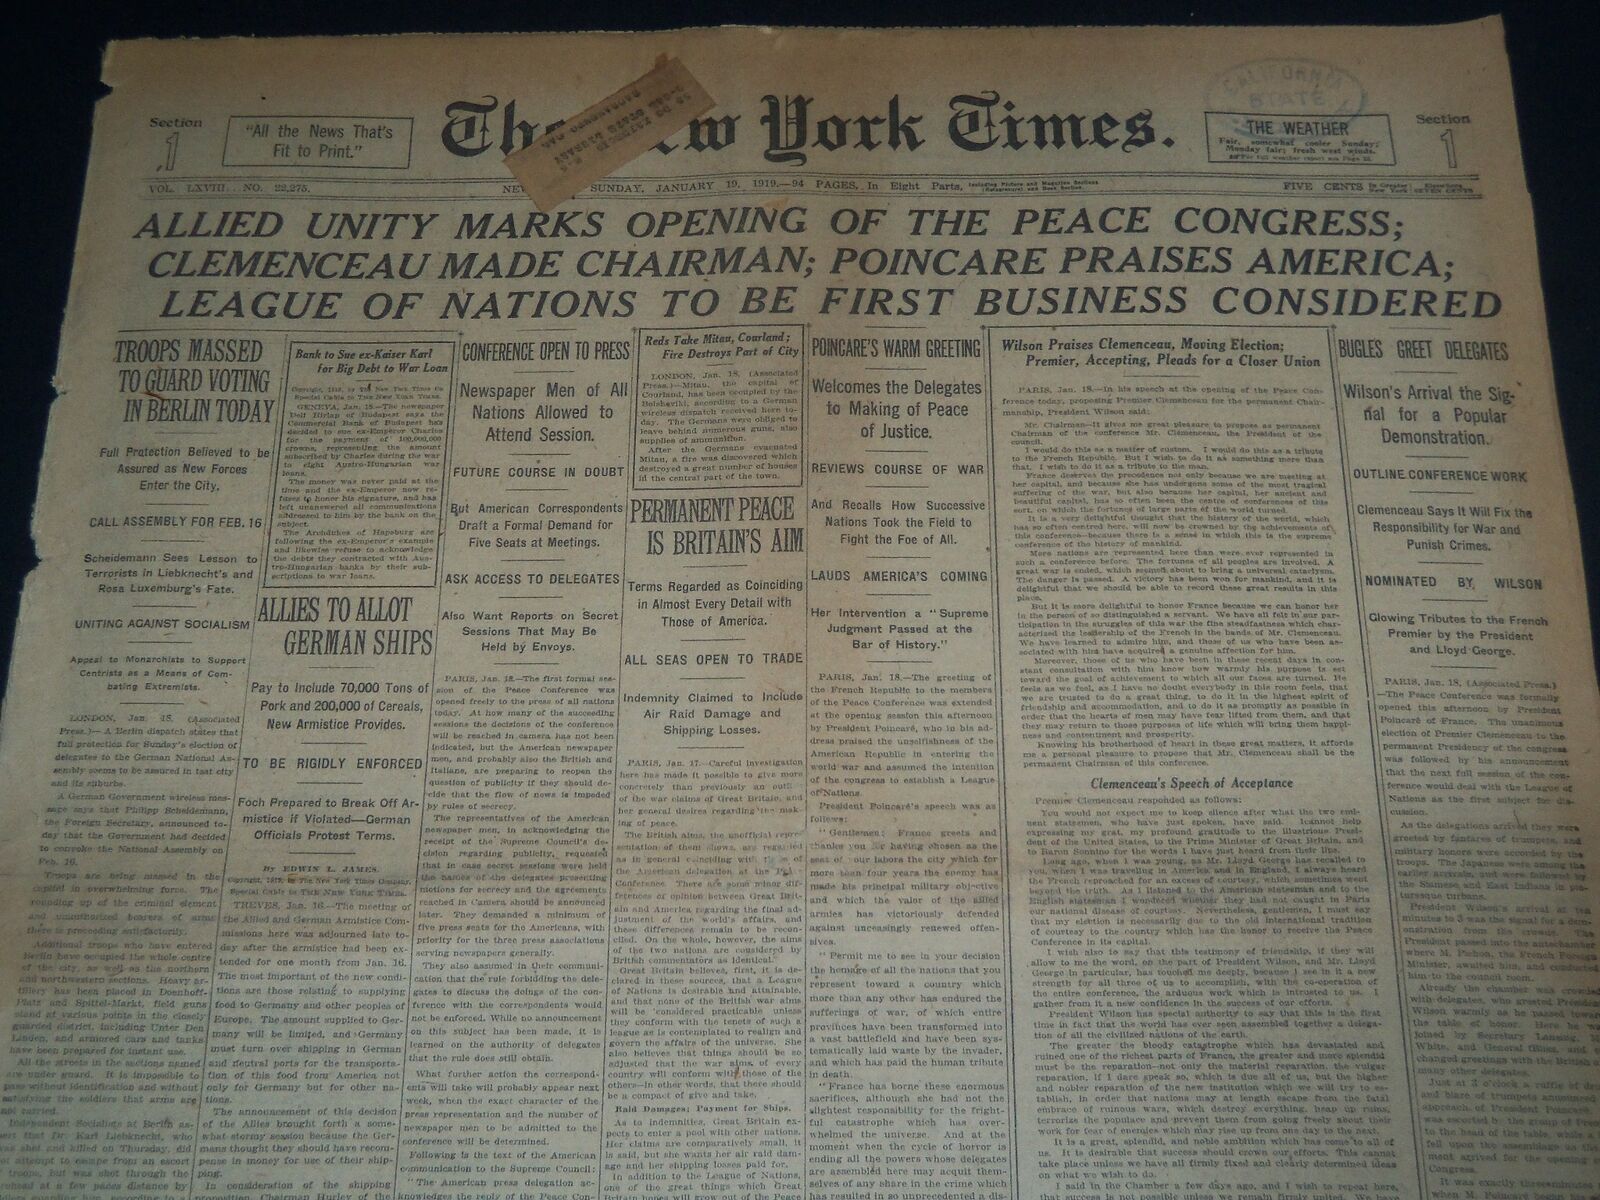 1919 JANUARY 19 NEW YORK TIMES - ALLIED UNITY MARKS OPENING OF PEACE - NT 7513